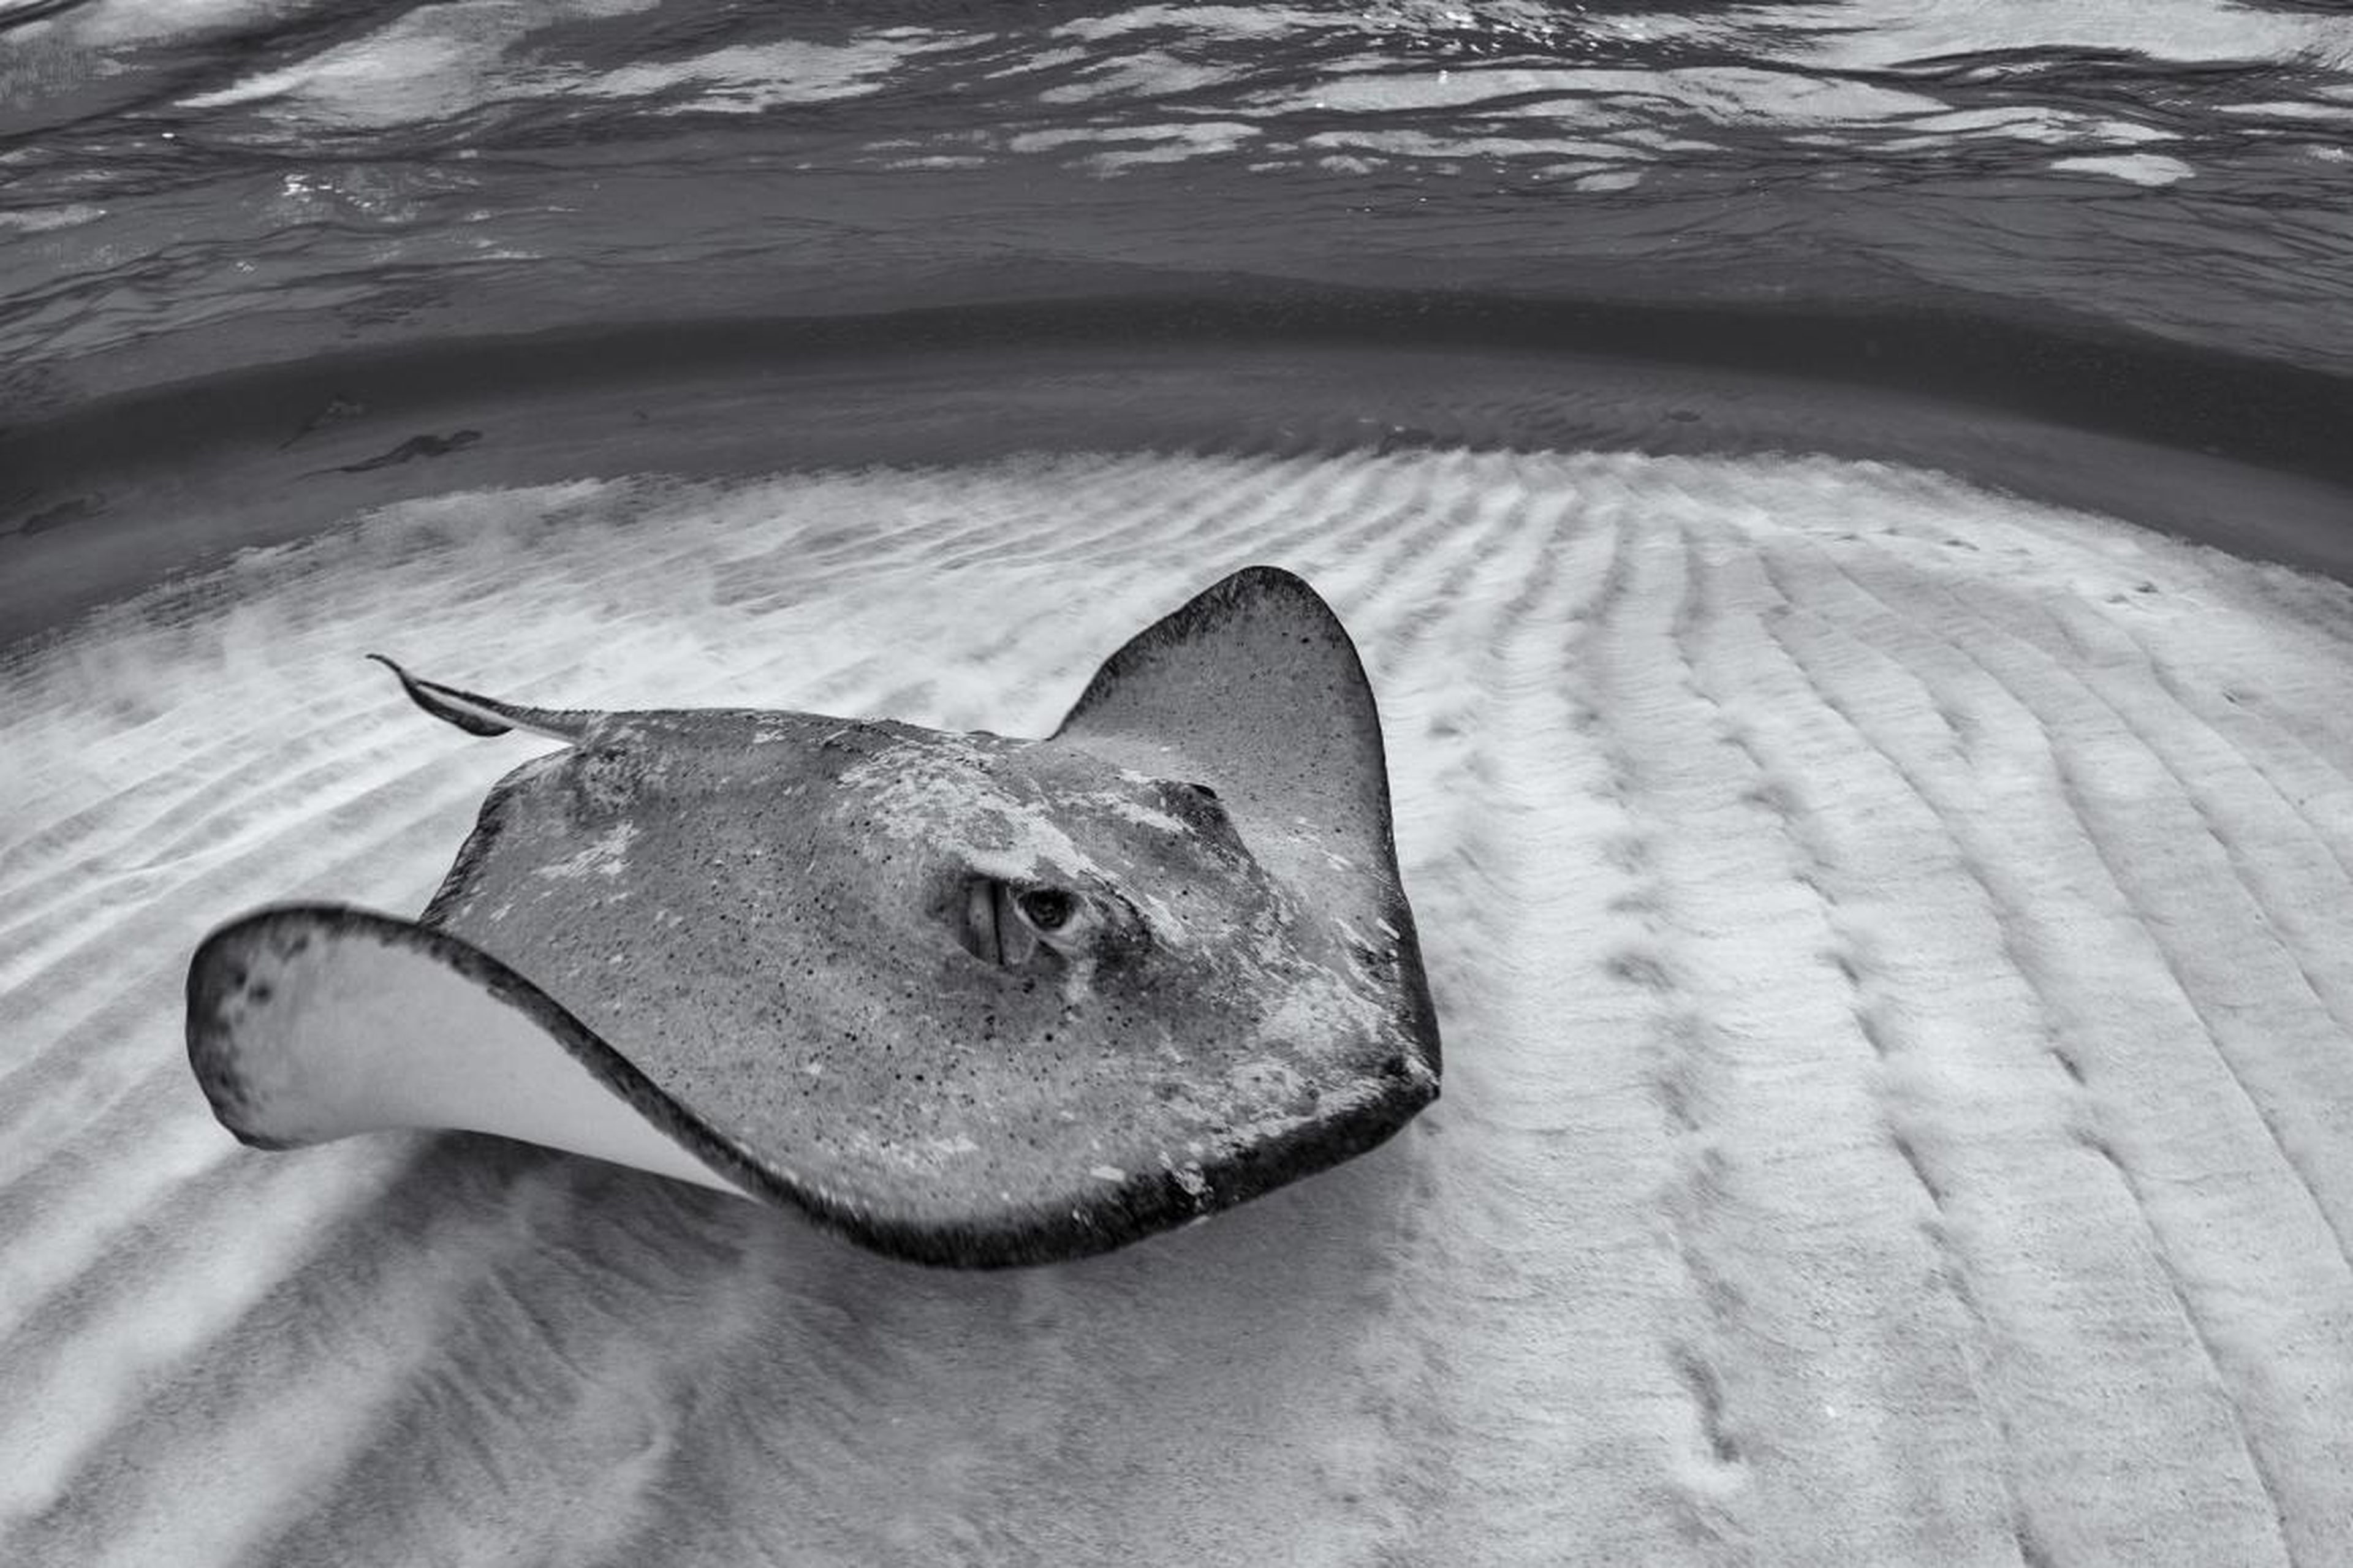 Photographer Henley Spiers took home the top two prizes in the the "Natural Light" category. This image of a southern stingray swimming in the Cayman Islands won gold.